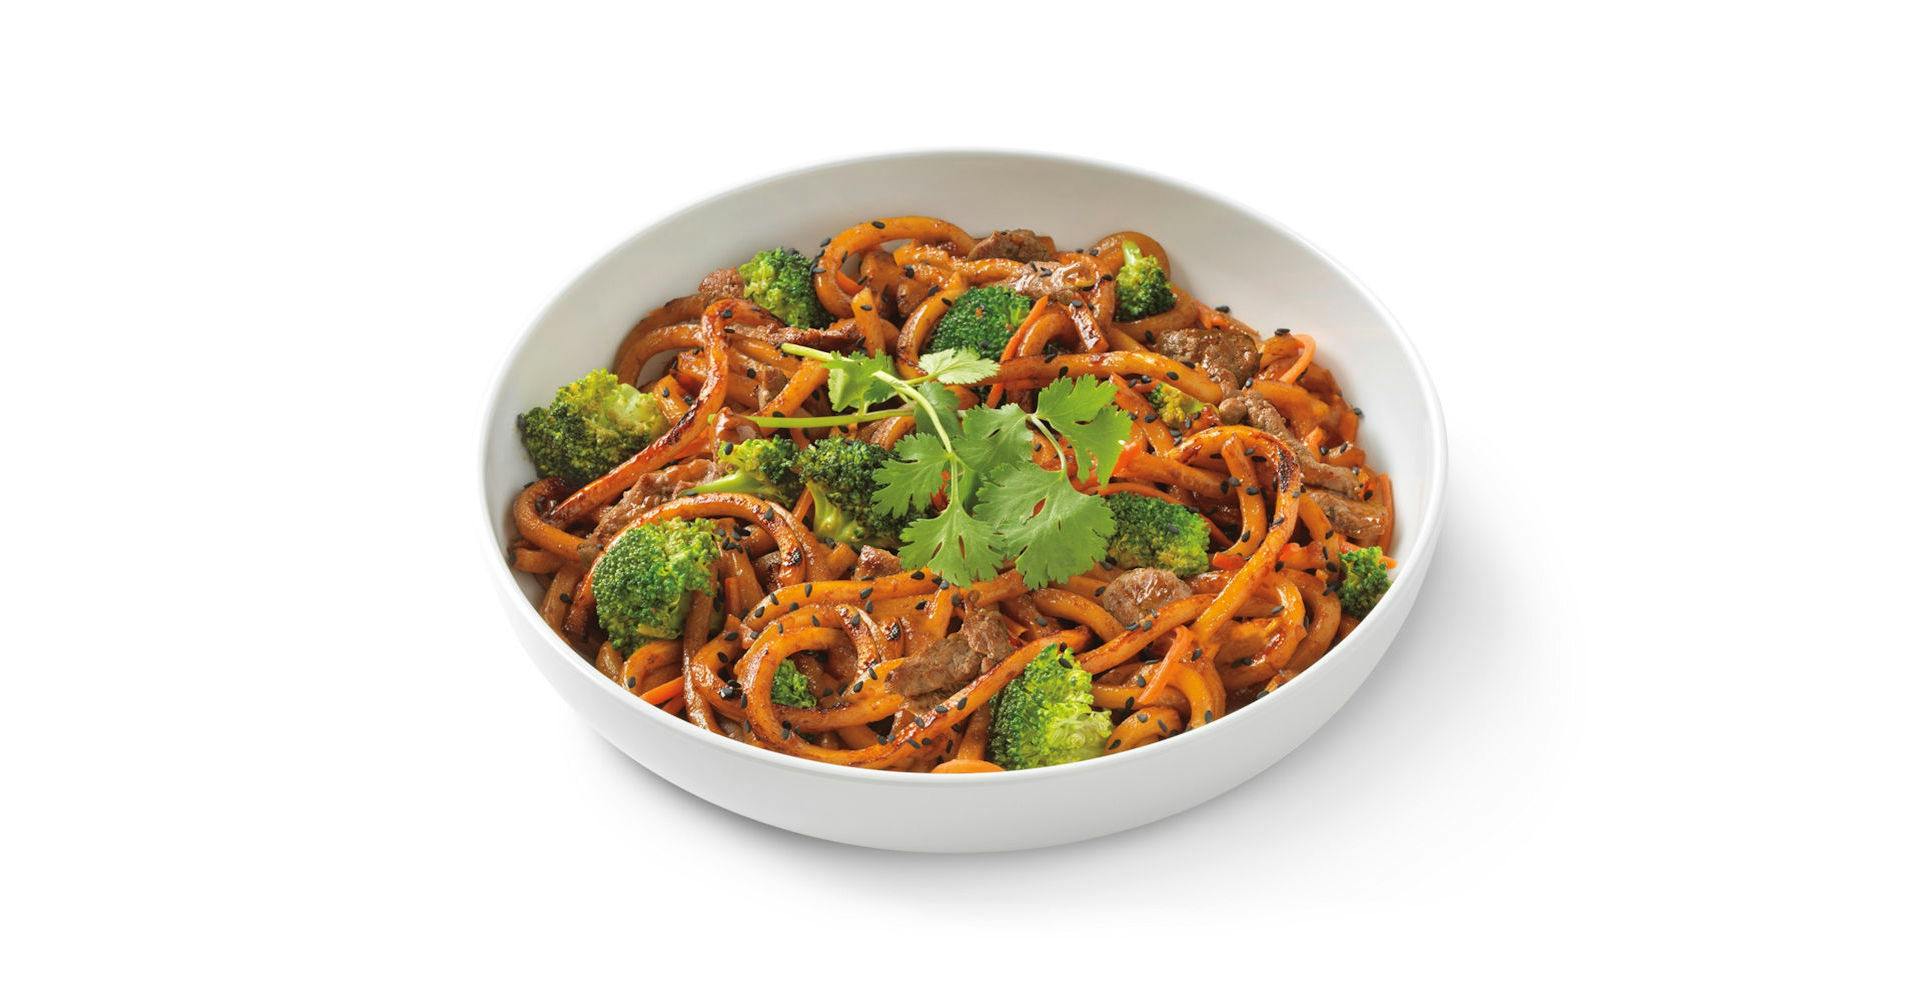 Japanese Pan Noodles with Marinated Steak from Noodles & Company - Waterloo in Waterloo, IA